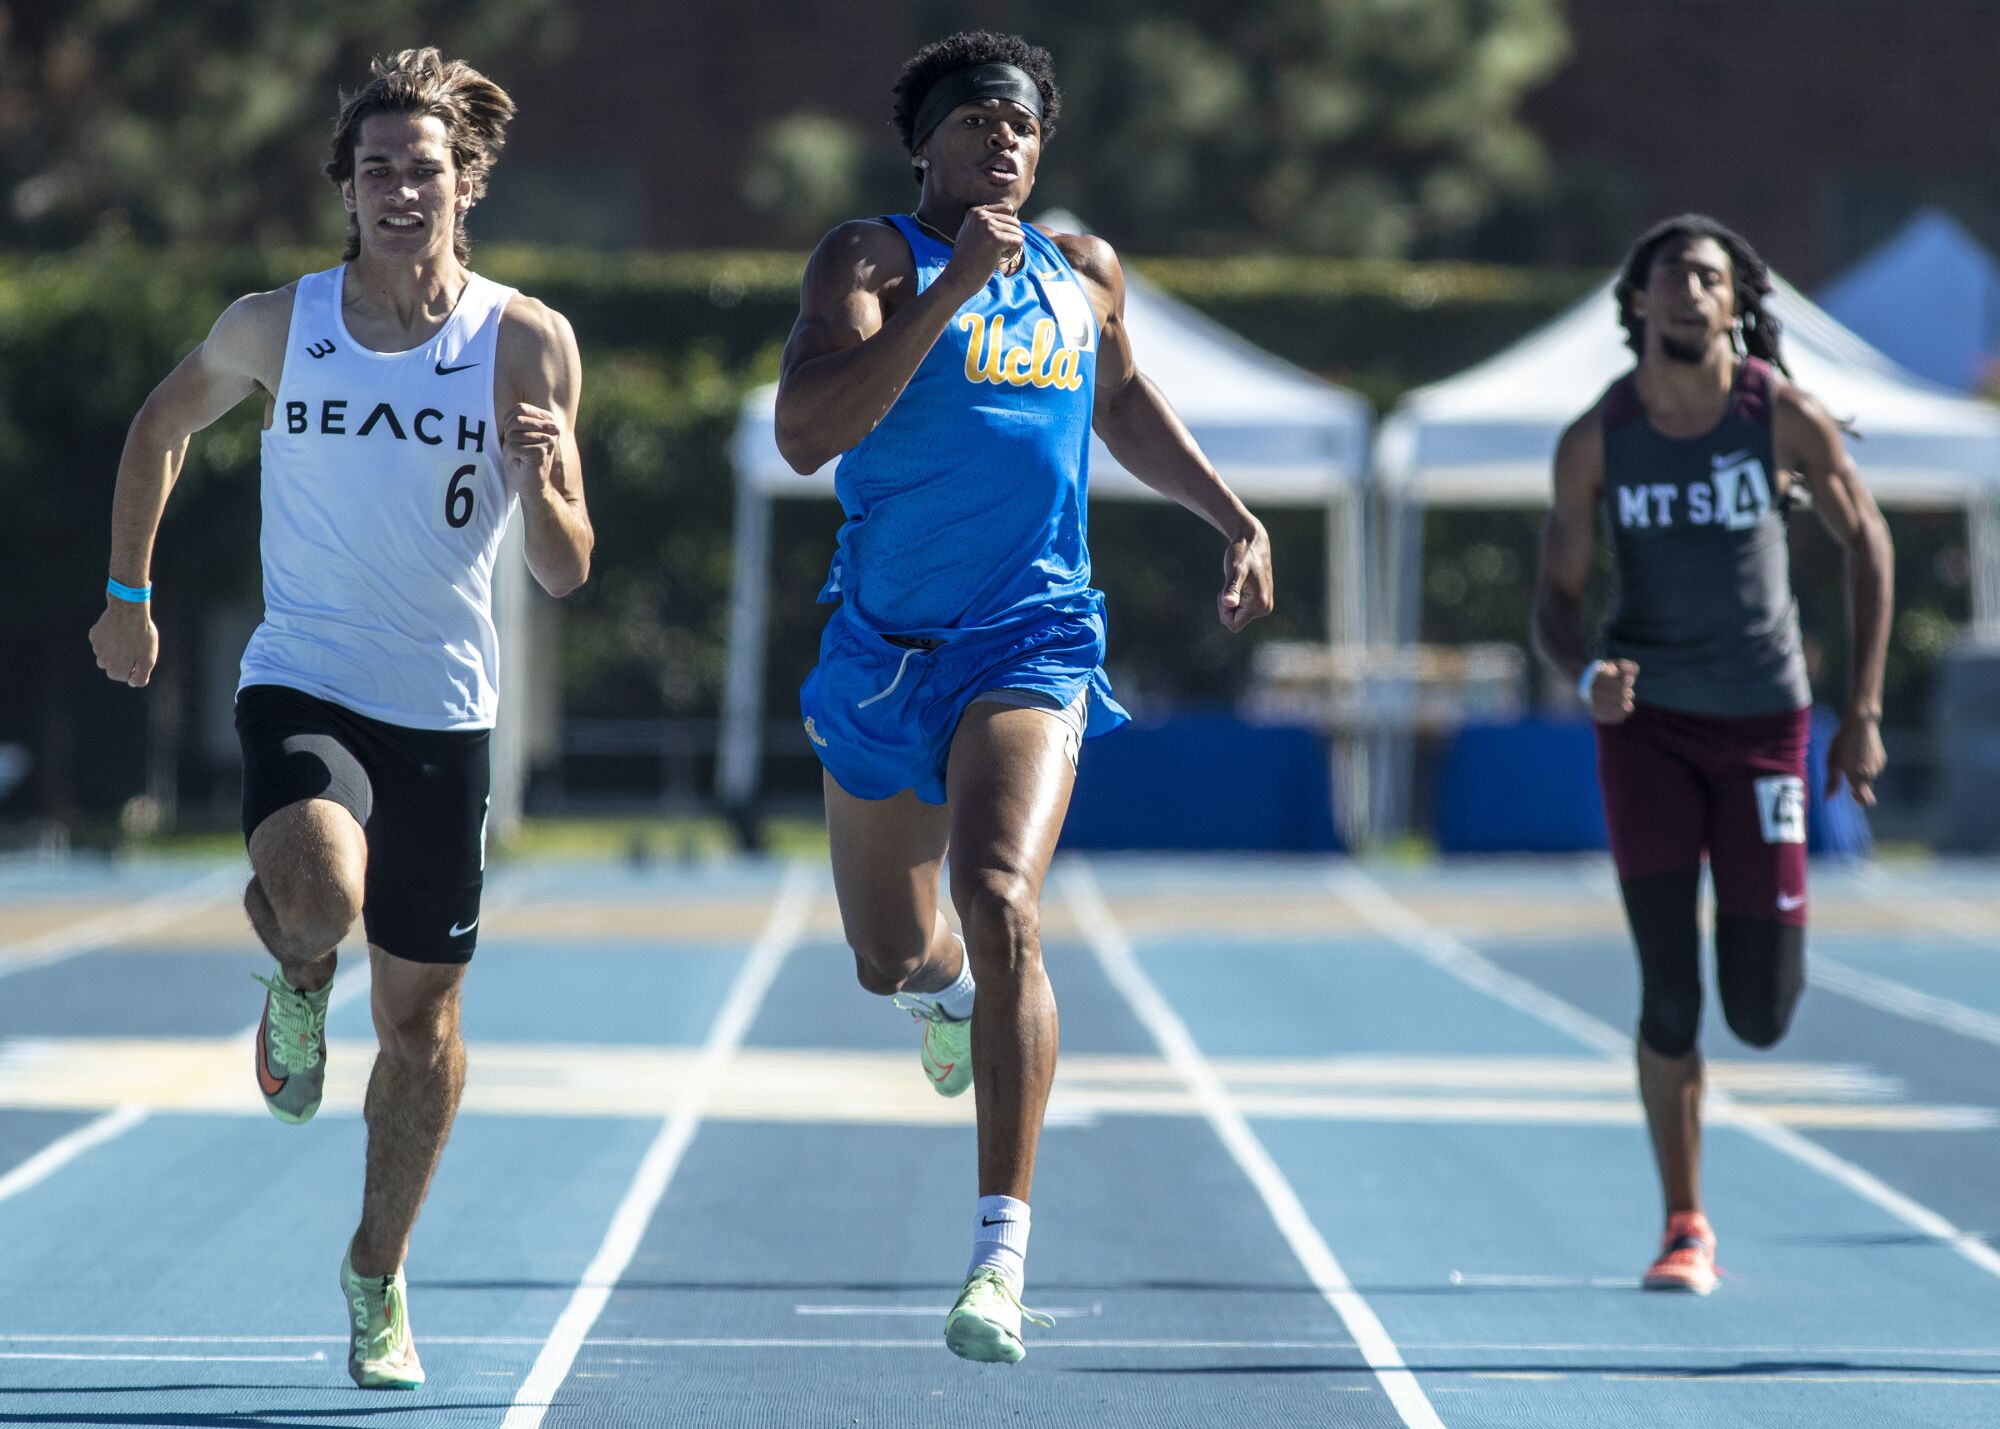 UCLA's Zaylon Thomas crosses the finish line in his heat of a 200-meter race.